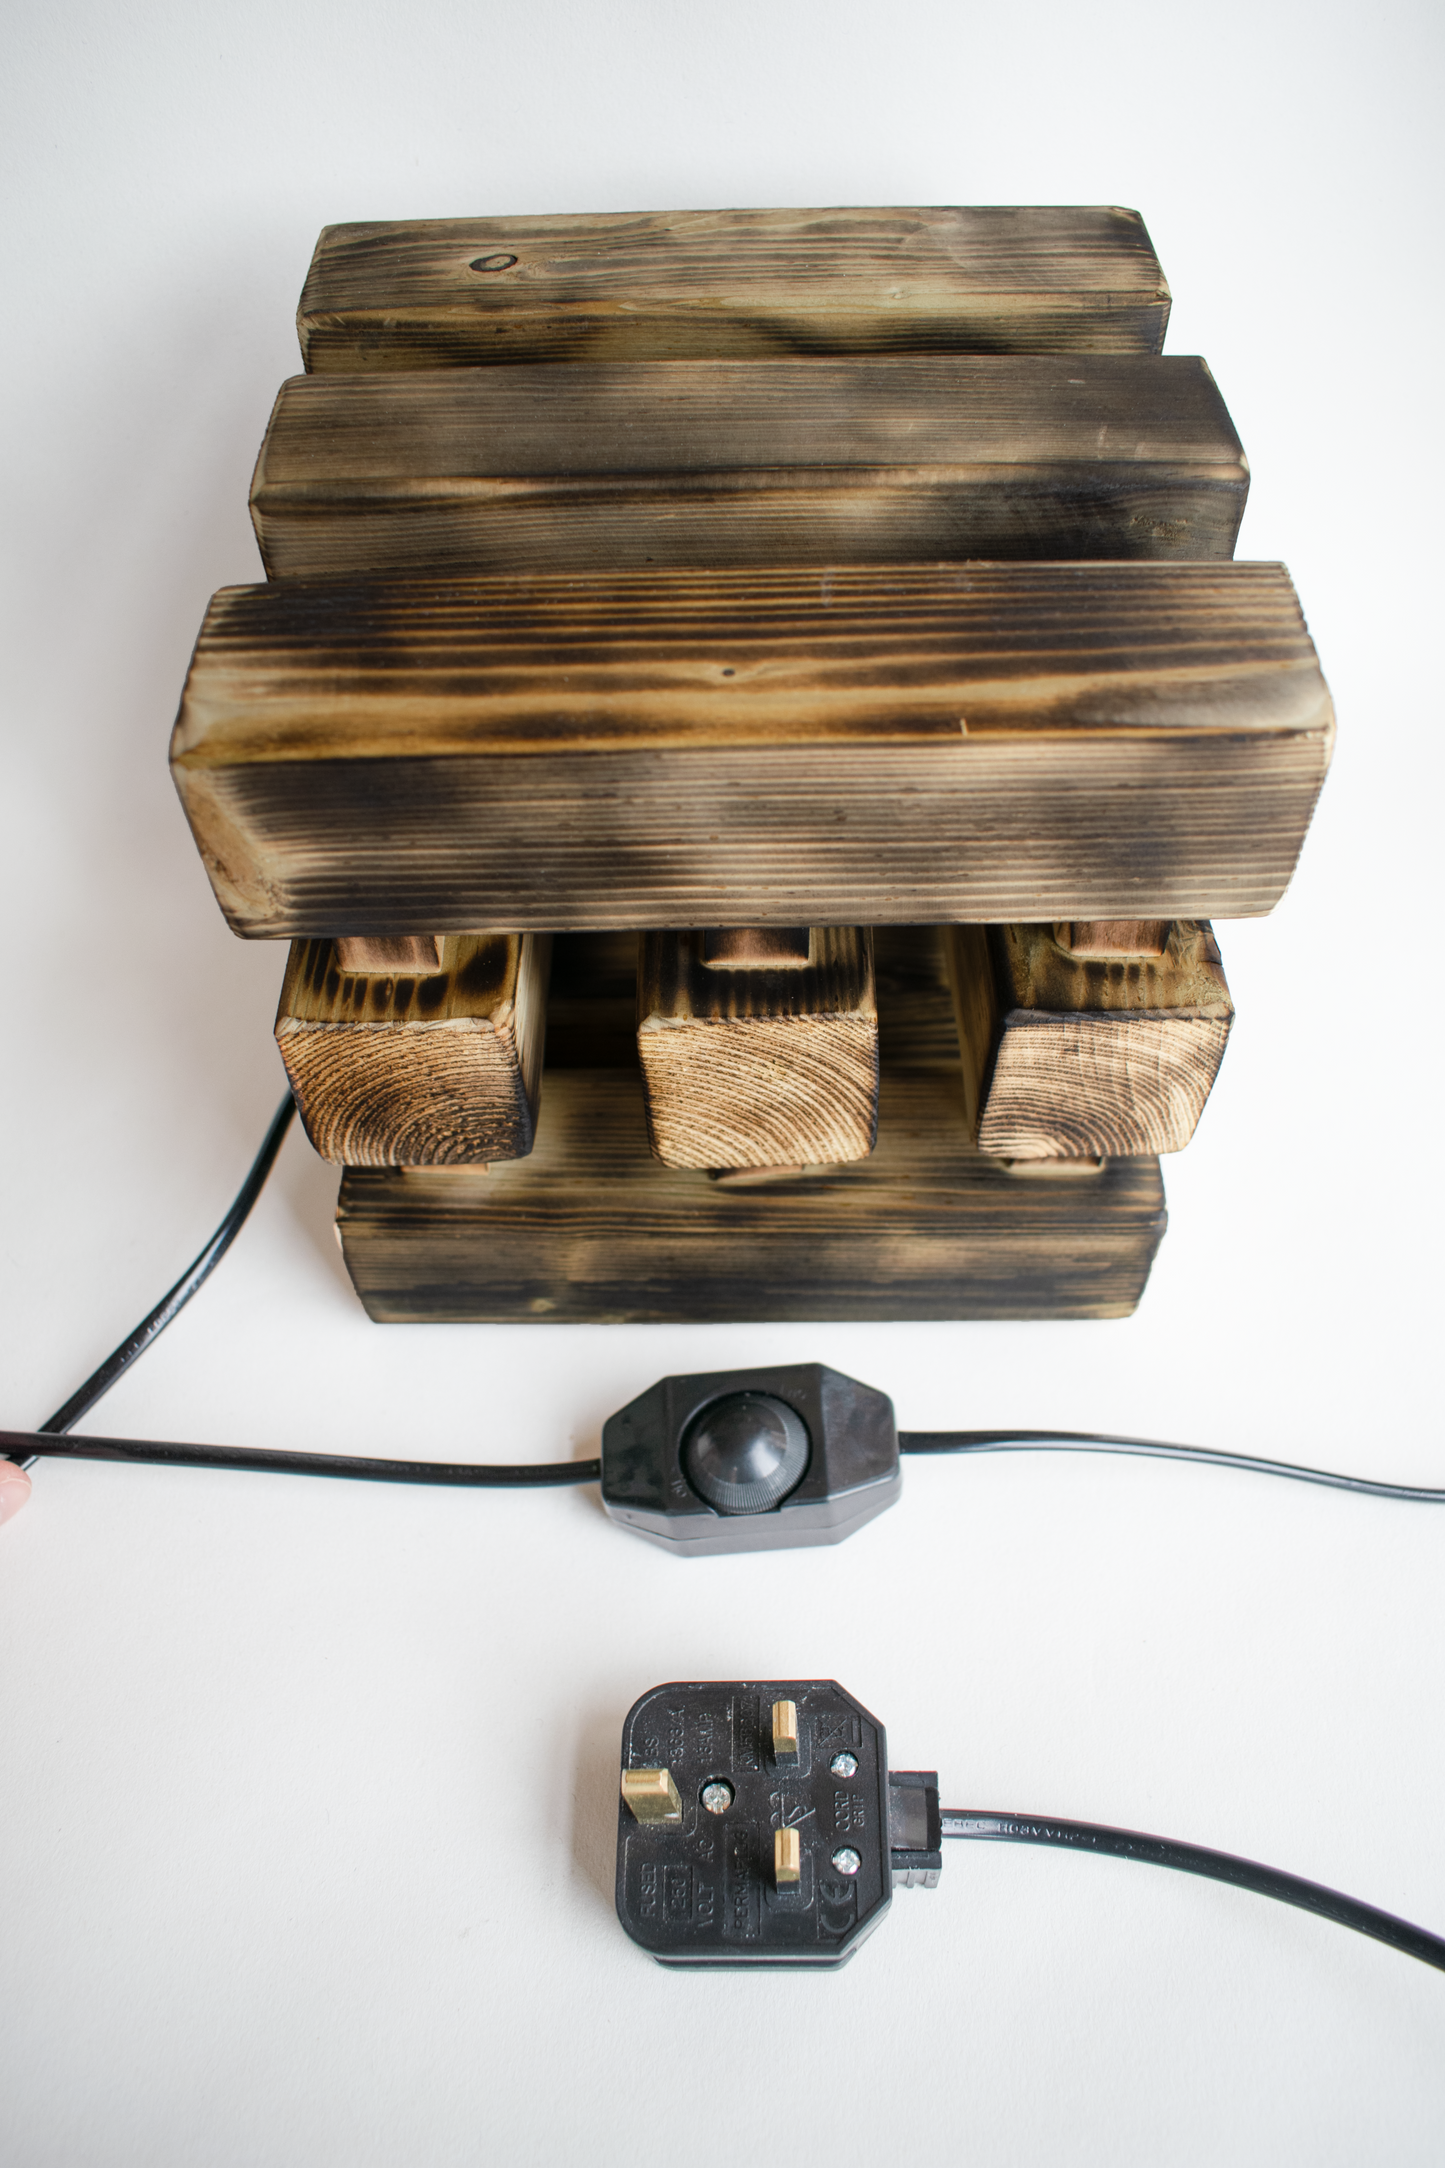 Burnt Wood Table Lamp with Square Base and Dimmer Switch, Rustic Cottage Farmhouse Style